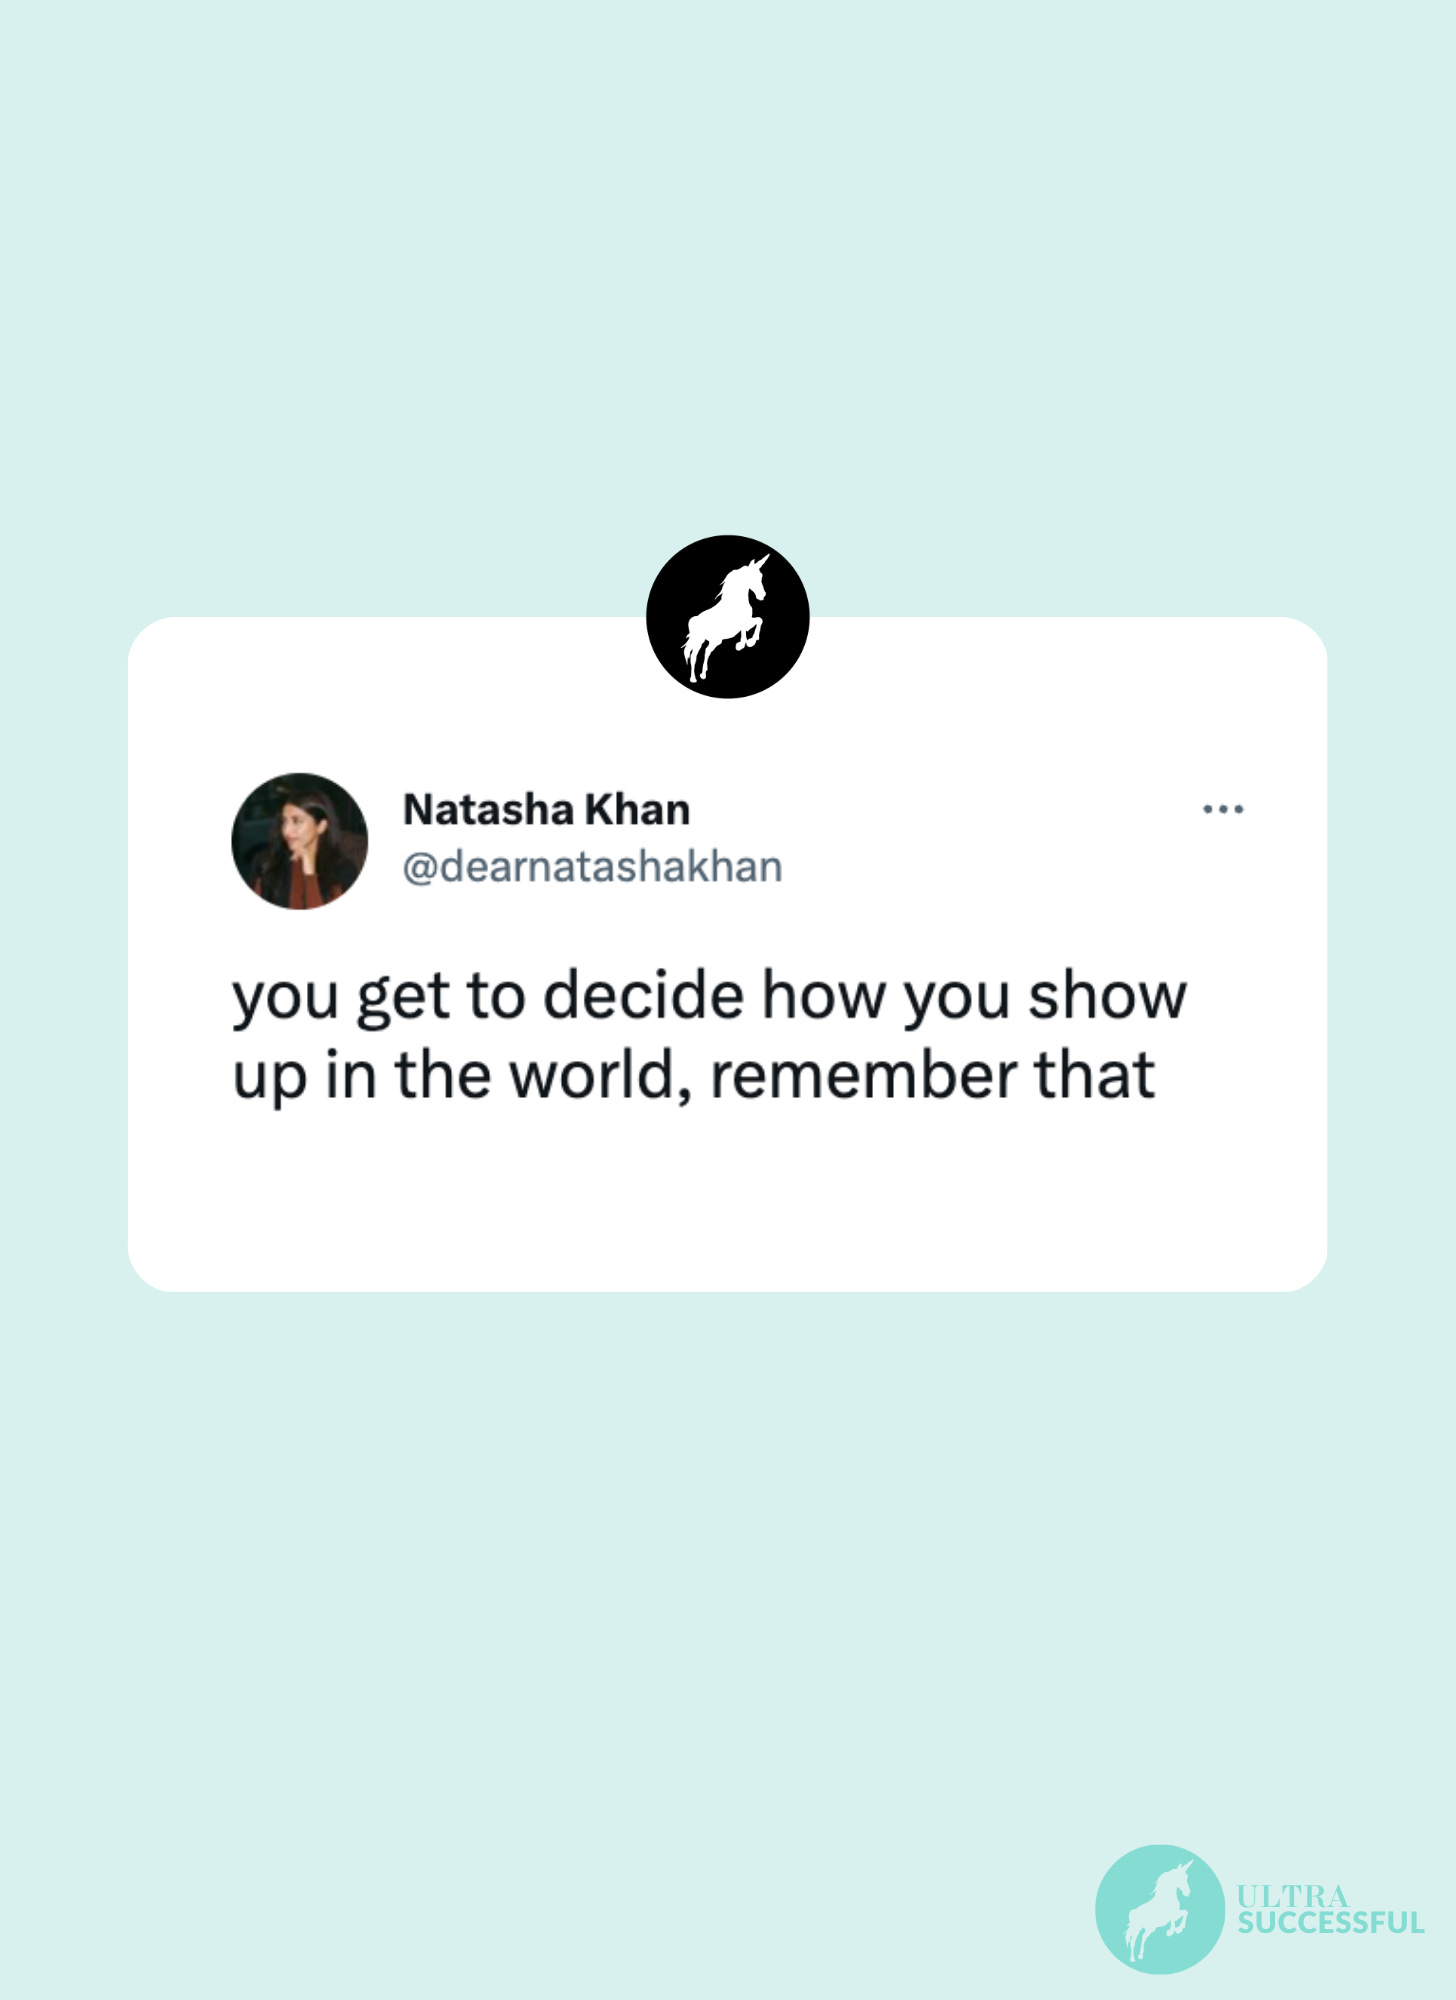 @dearnatashakhan: you get to decide how you show up in the world, remember that